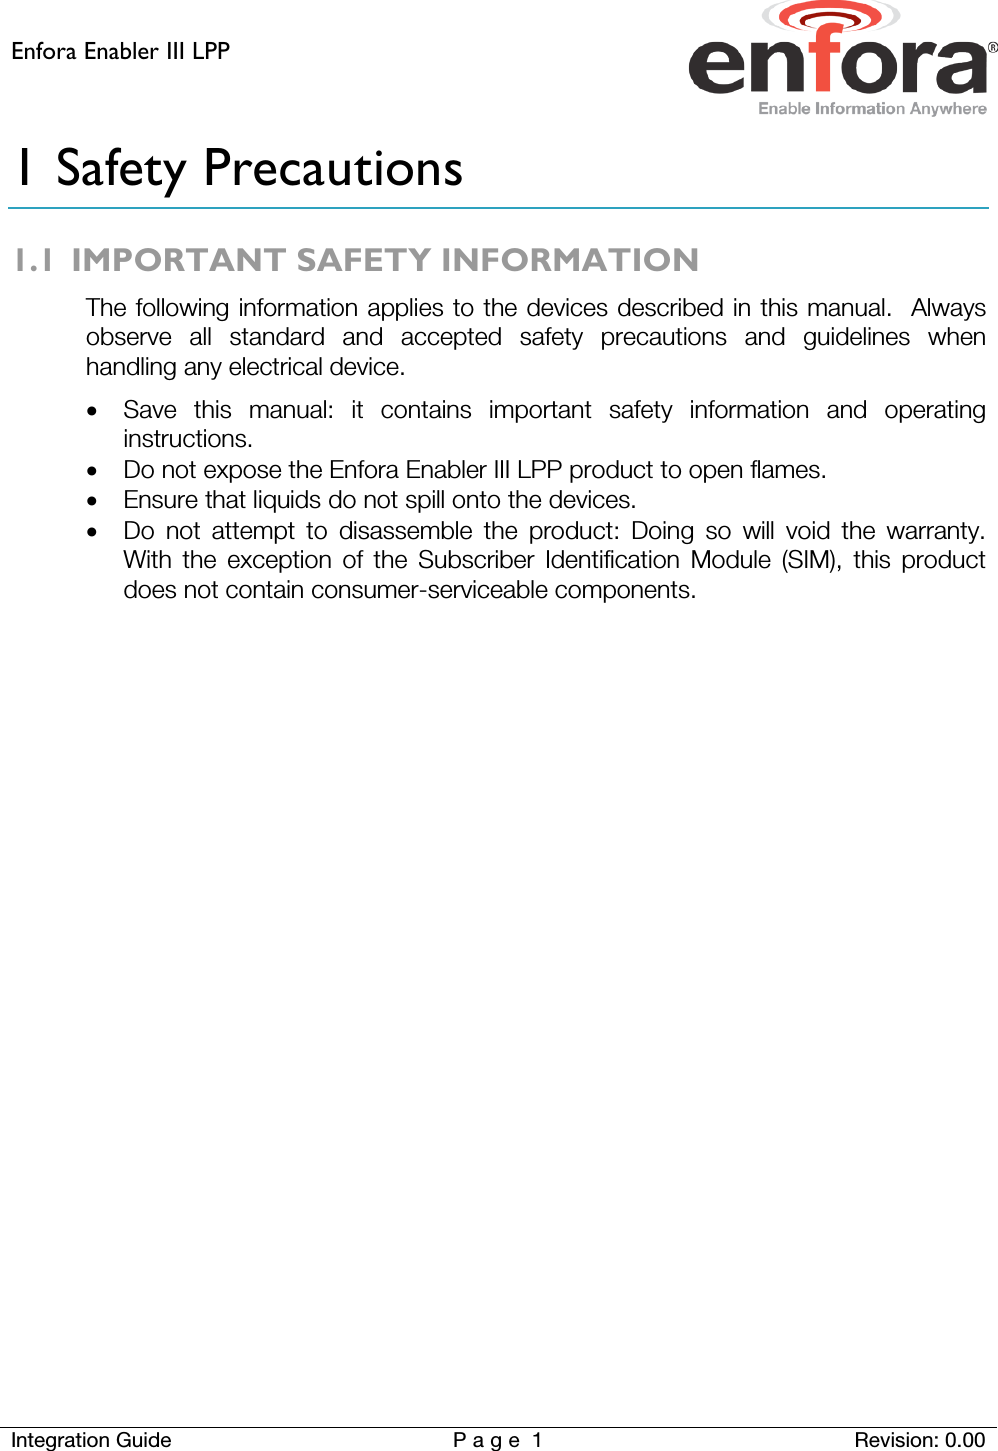 Enfora Enabler III LPP    Integration Guide Page 1  Revision: 0.00  1 Safety Precautions 1.1 IMPORTANT SAFETY INFORMATION The following information applies to the devices described in this manual.  Always observe all standard and accepted safety precautions and guidelines when handling any electrical device. • Save this manual: it contains important safety information and operating instructions. • Do not expose the Enfora Enabler III LPP product to open flames. • Ensure that liquids do not spill onto the devices. • Do not attempt to disassemble the product: Doing so will void the warranty.  With the exception of the Subscriber Identification Module (SIM), this product does not contain consumer-serviceable components.   